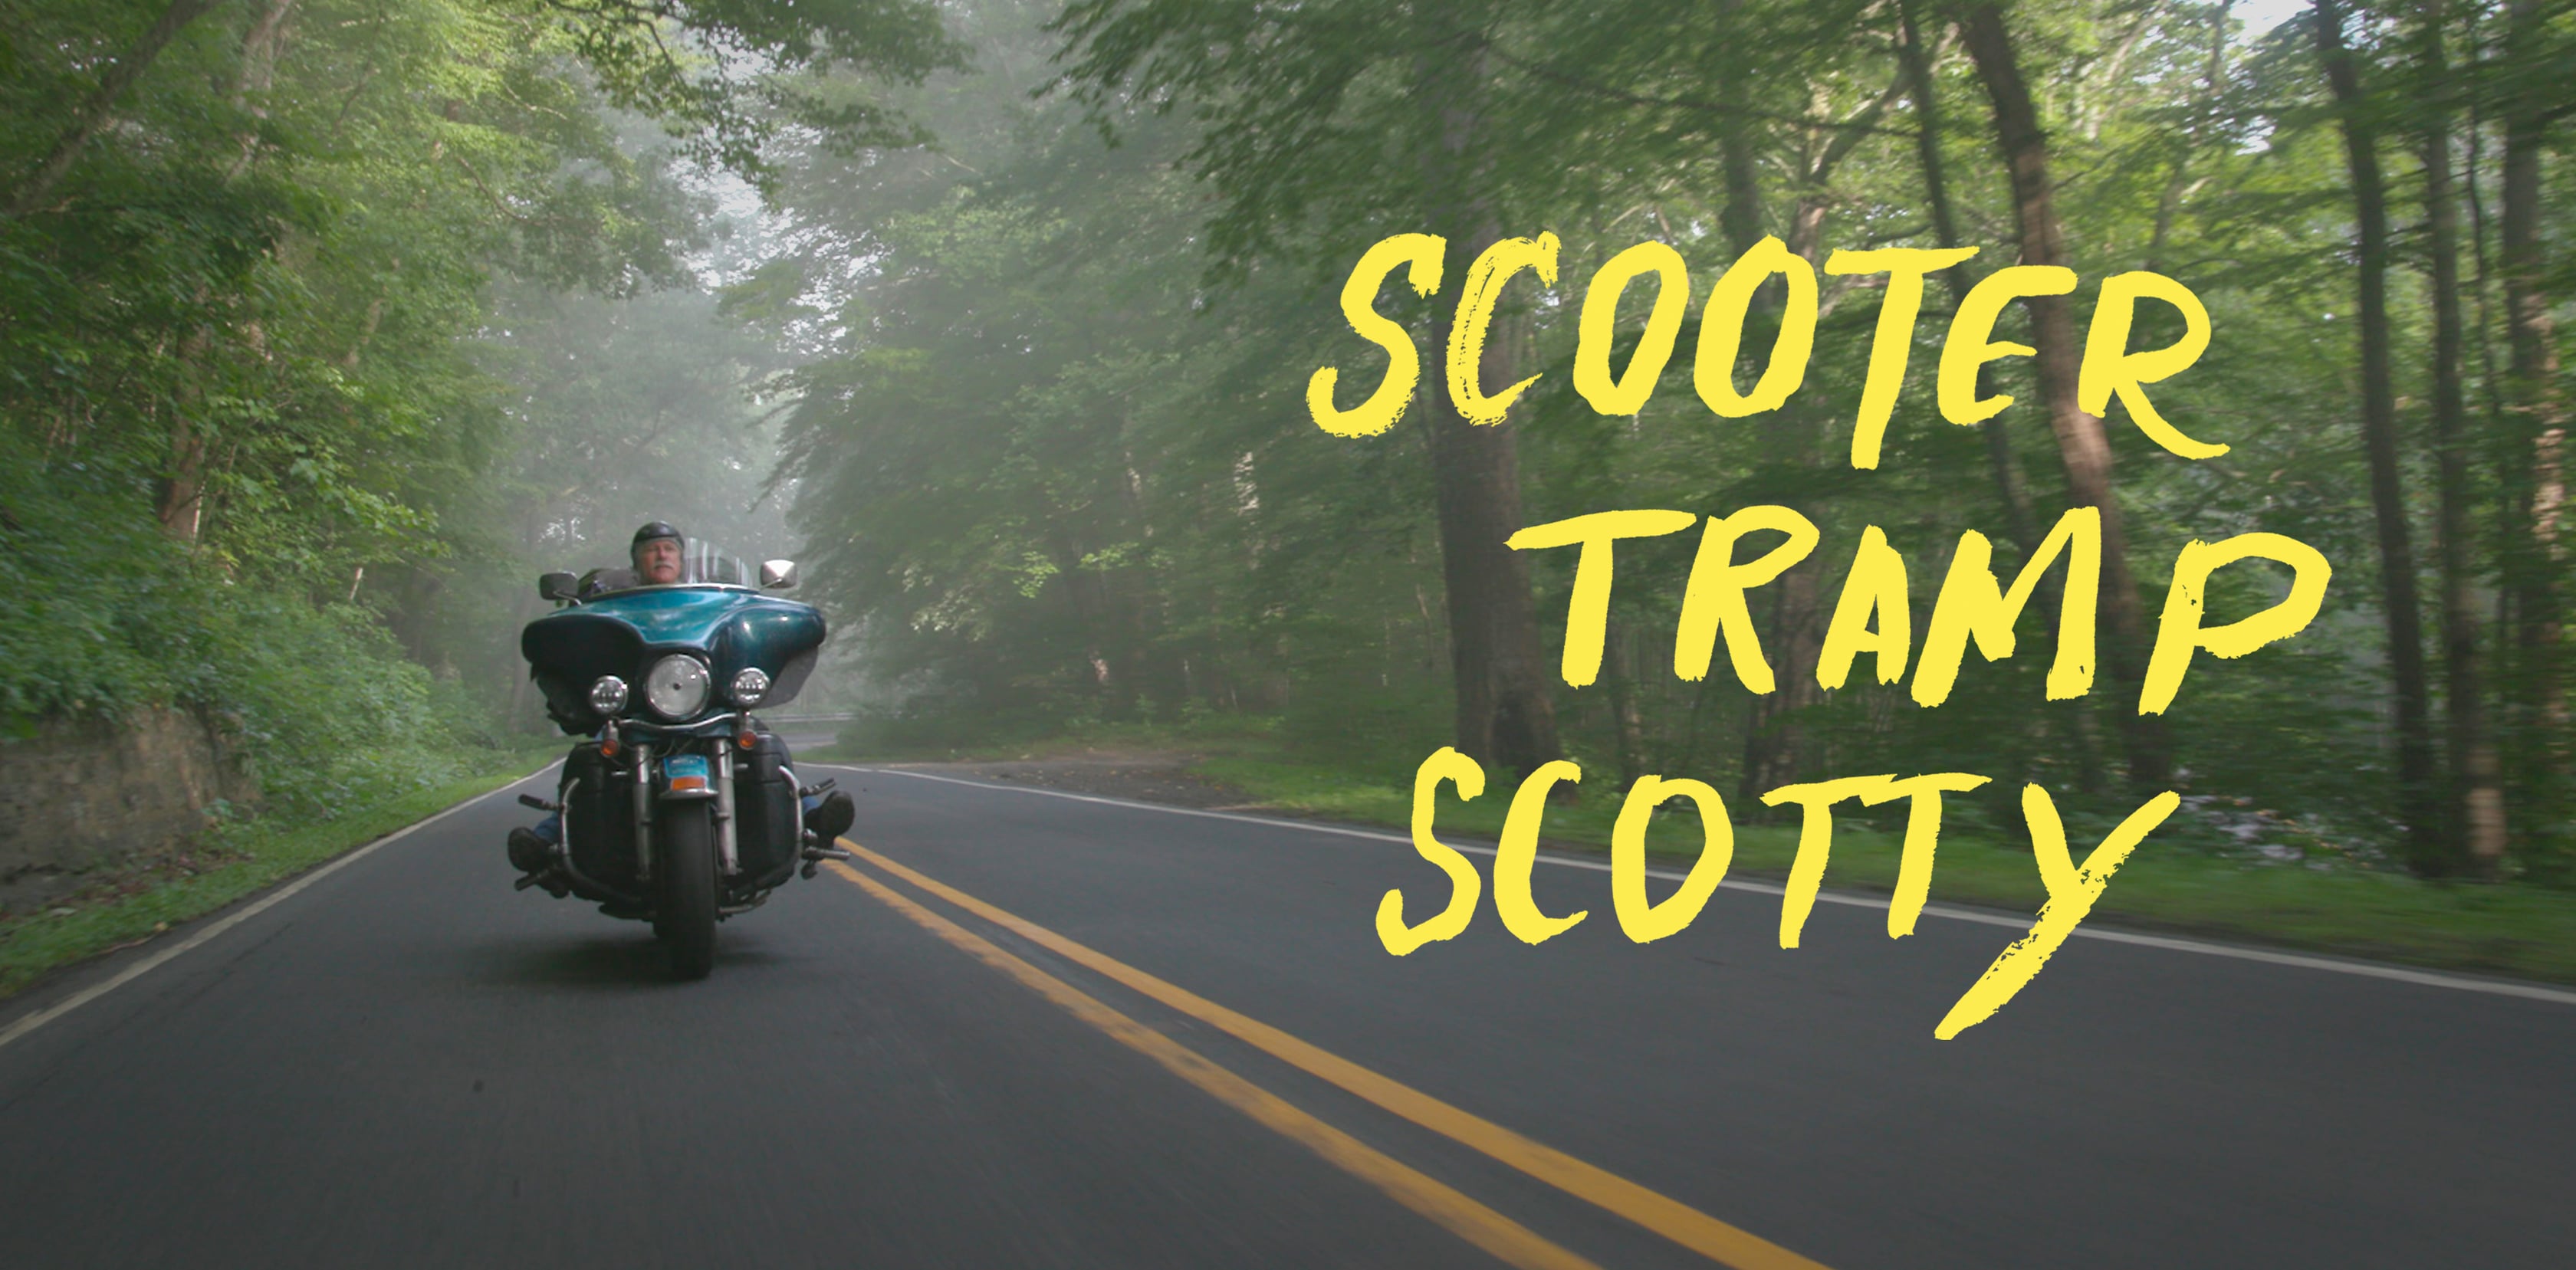 Scooter tramp scotty latest video